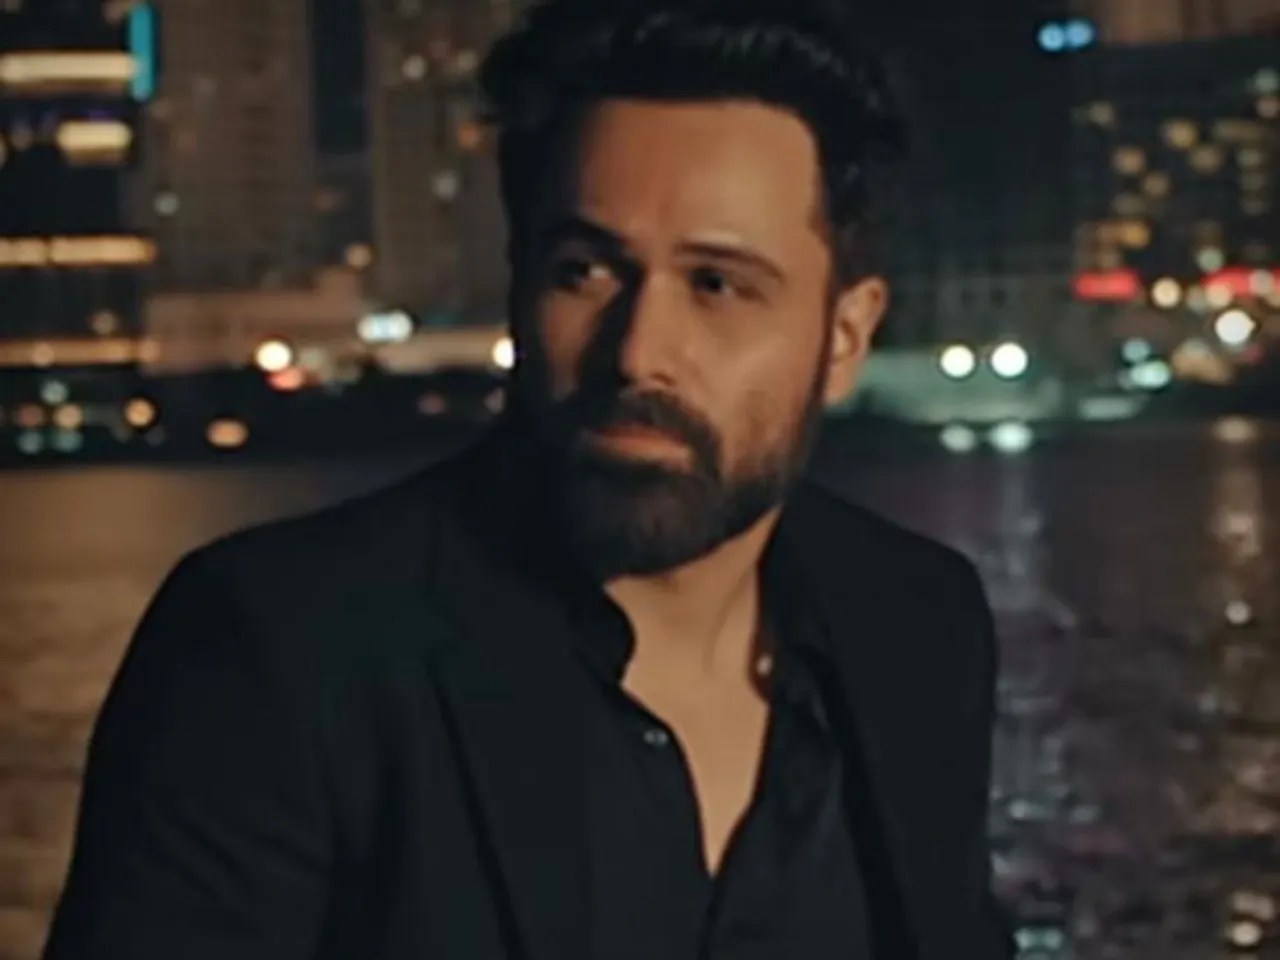 Emraan Hashmi’s latest song ‘Ishq Nahi Karte’ is his birthday treat to fans. Out now!